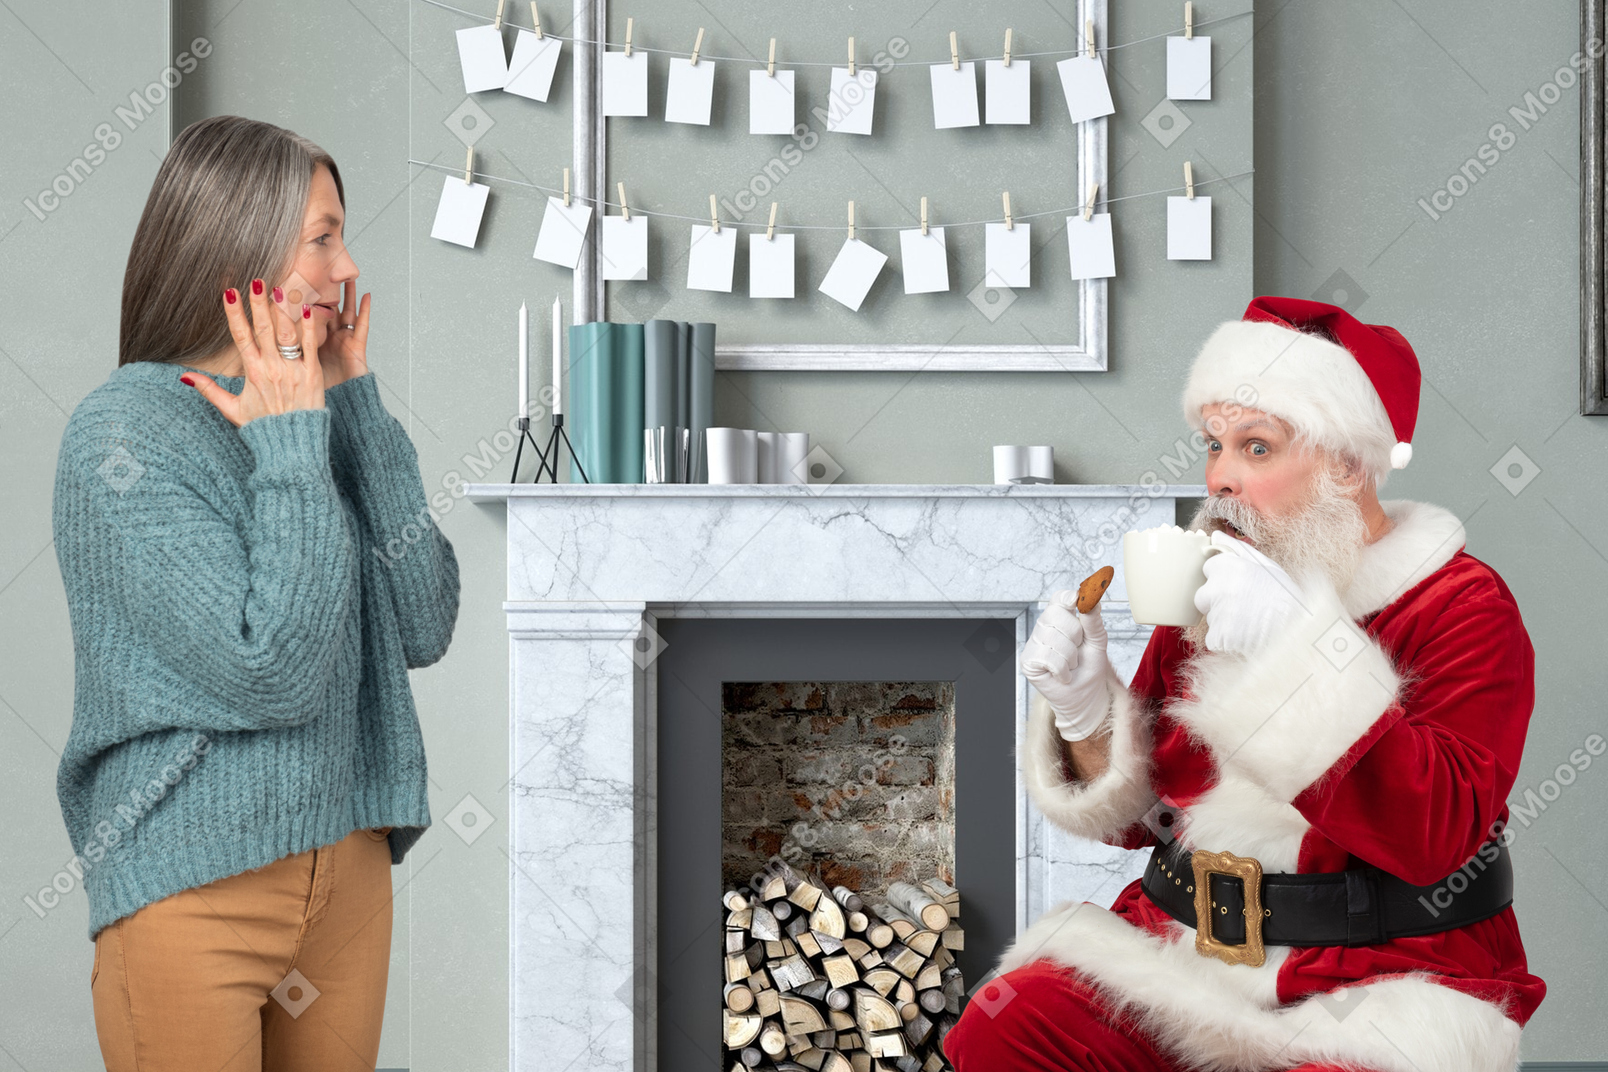 Santa claus got caught by the woman